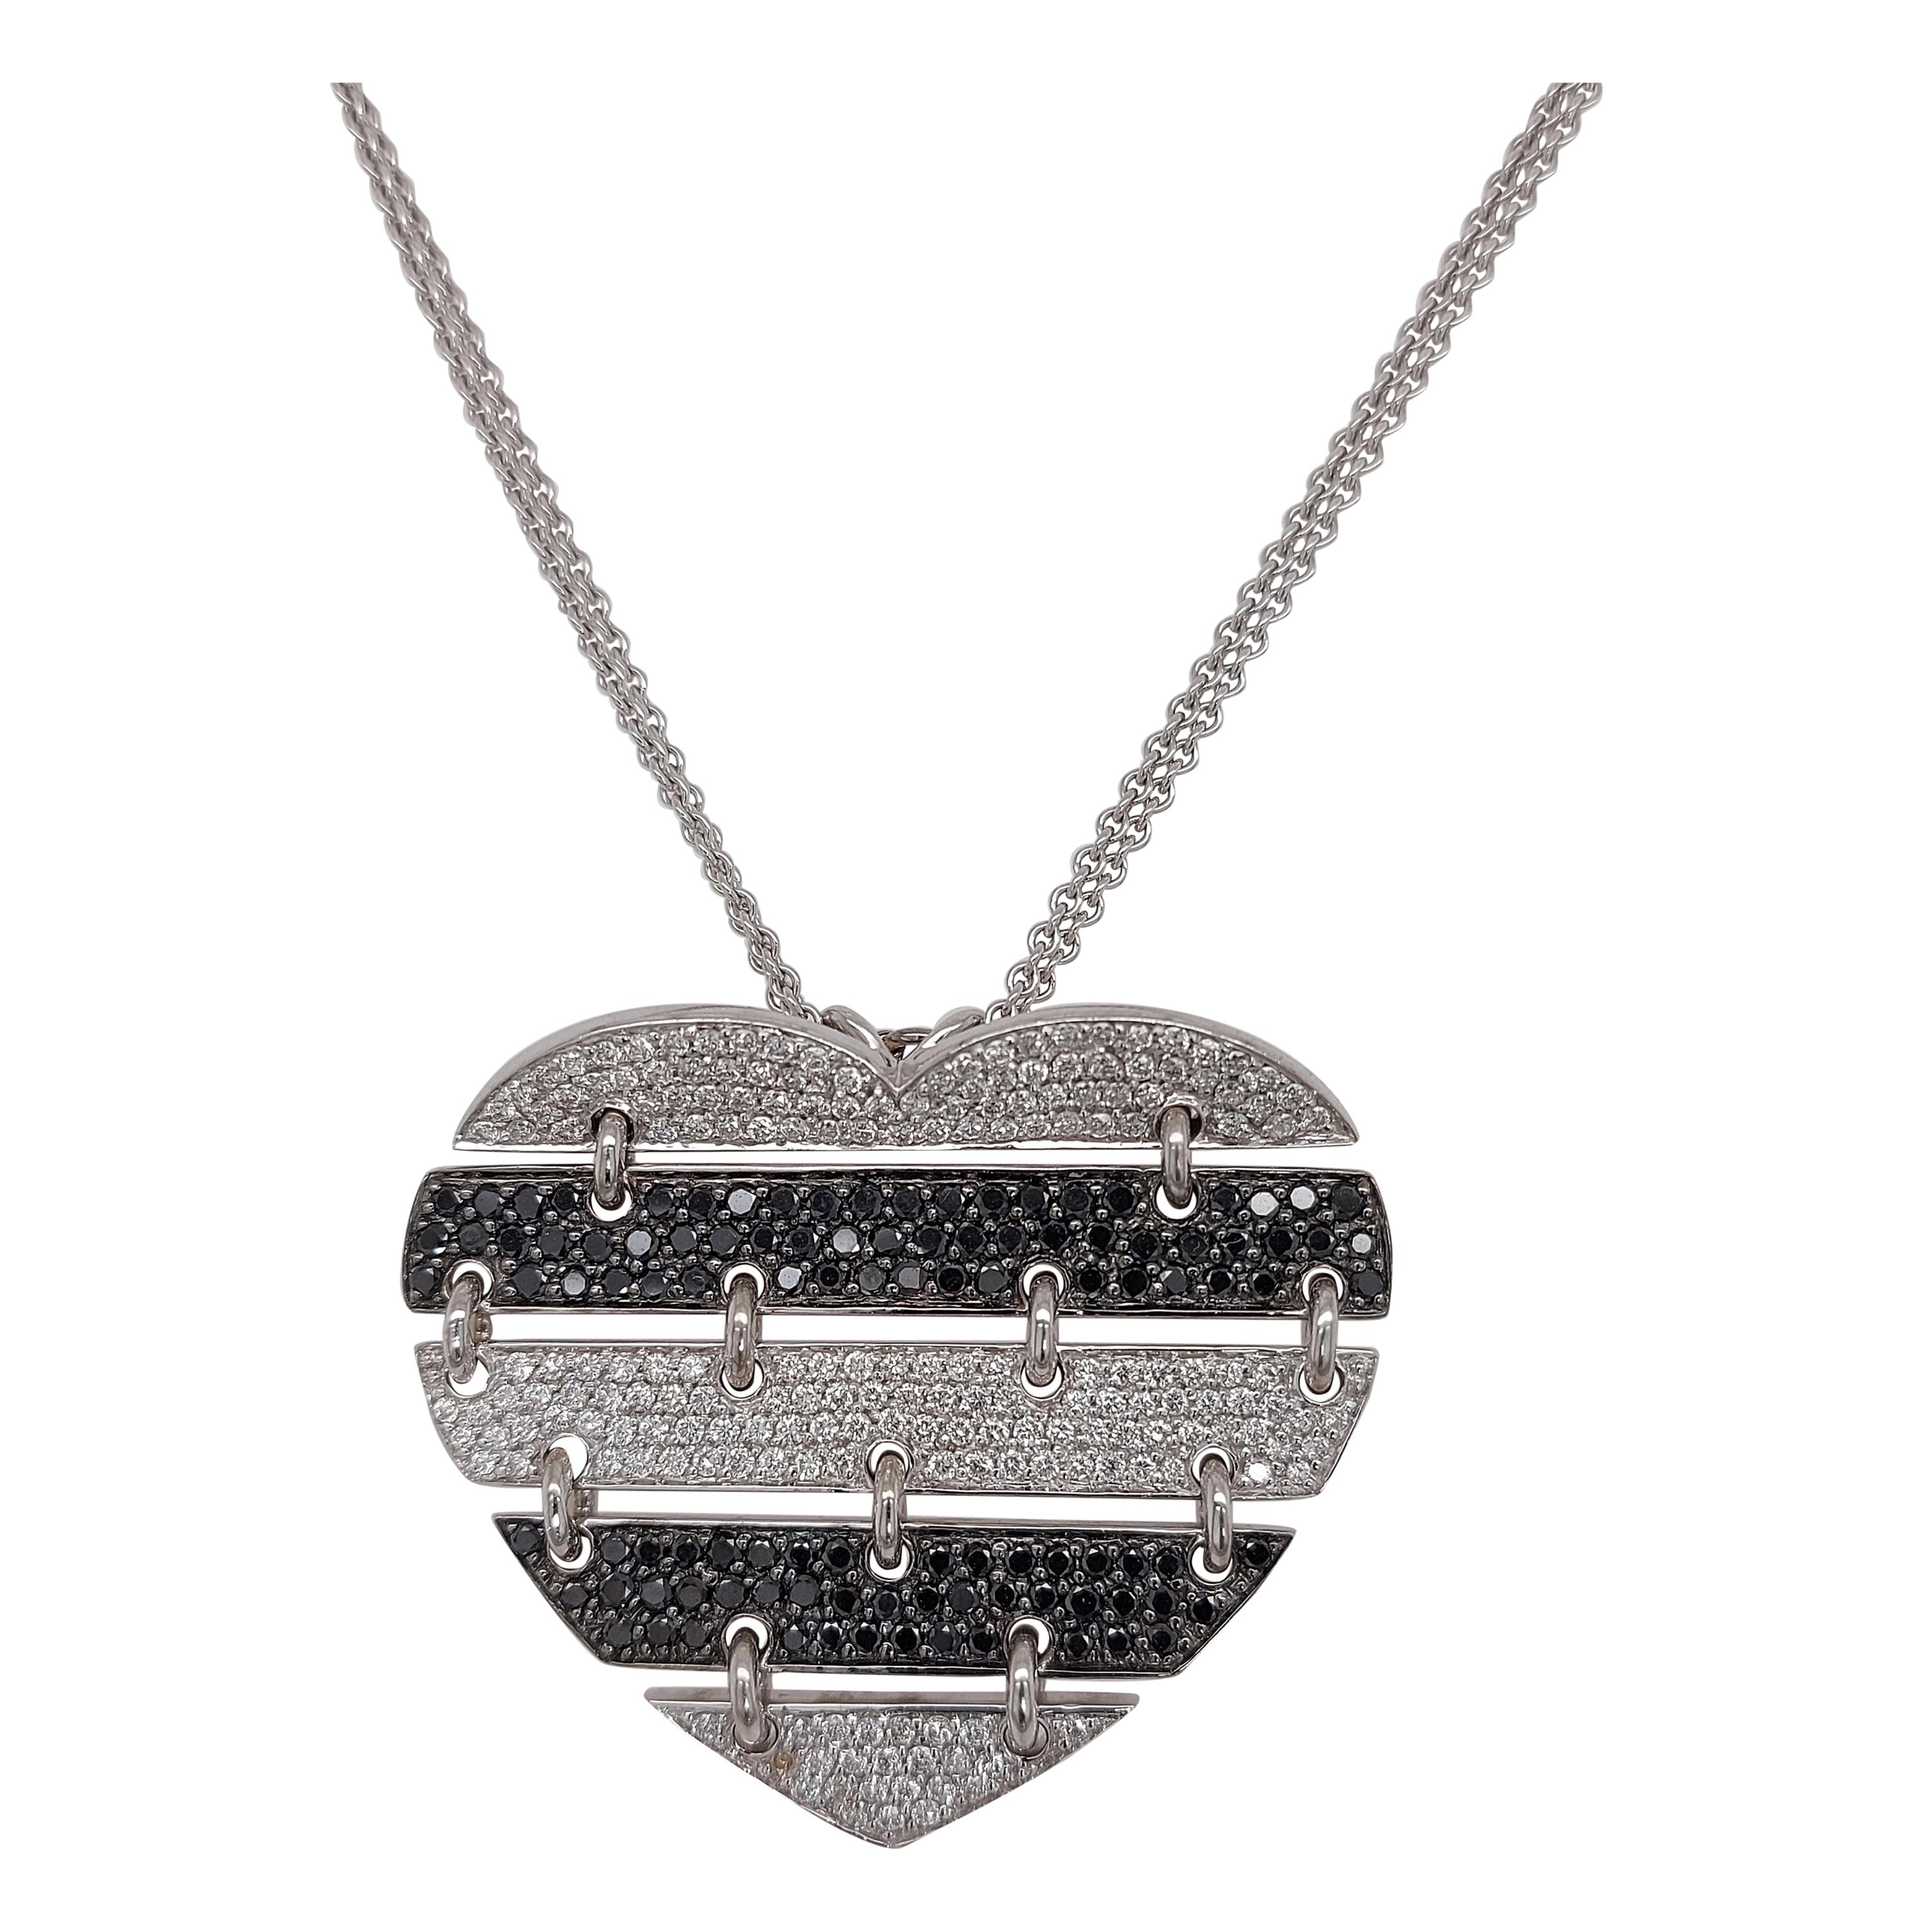 Stunning Moving 18kt White Gold Necklace with 2.5ct Black and White Diamonds